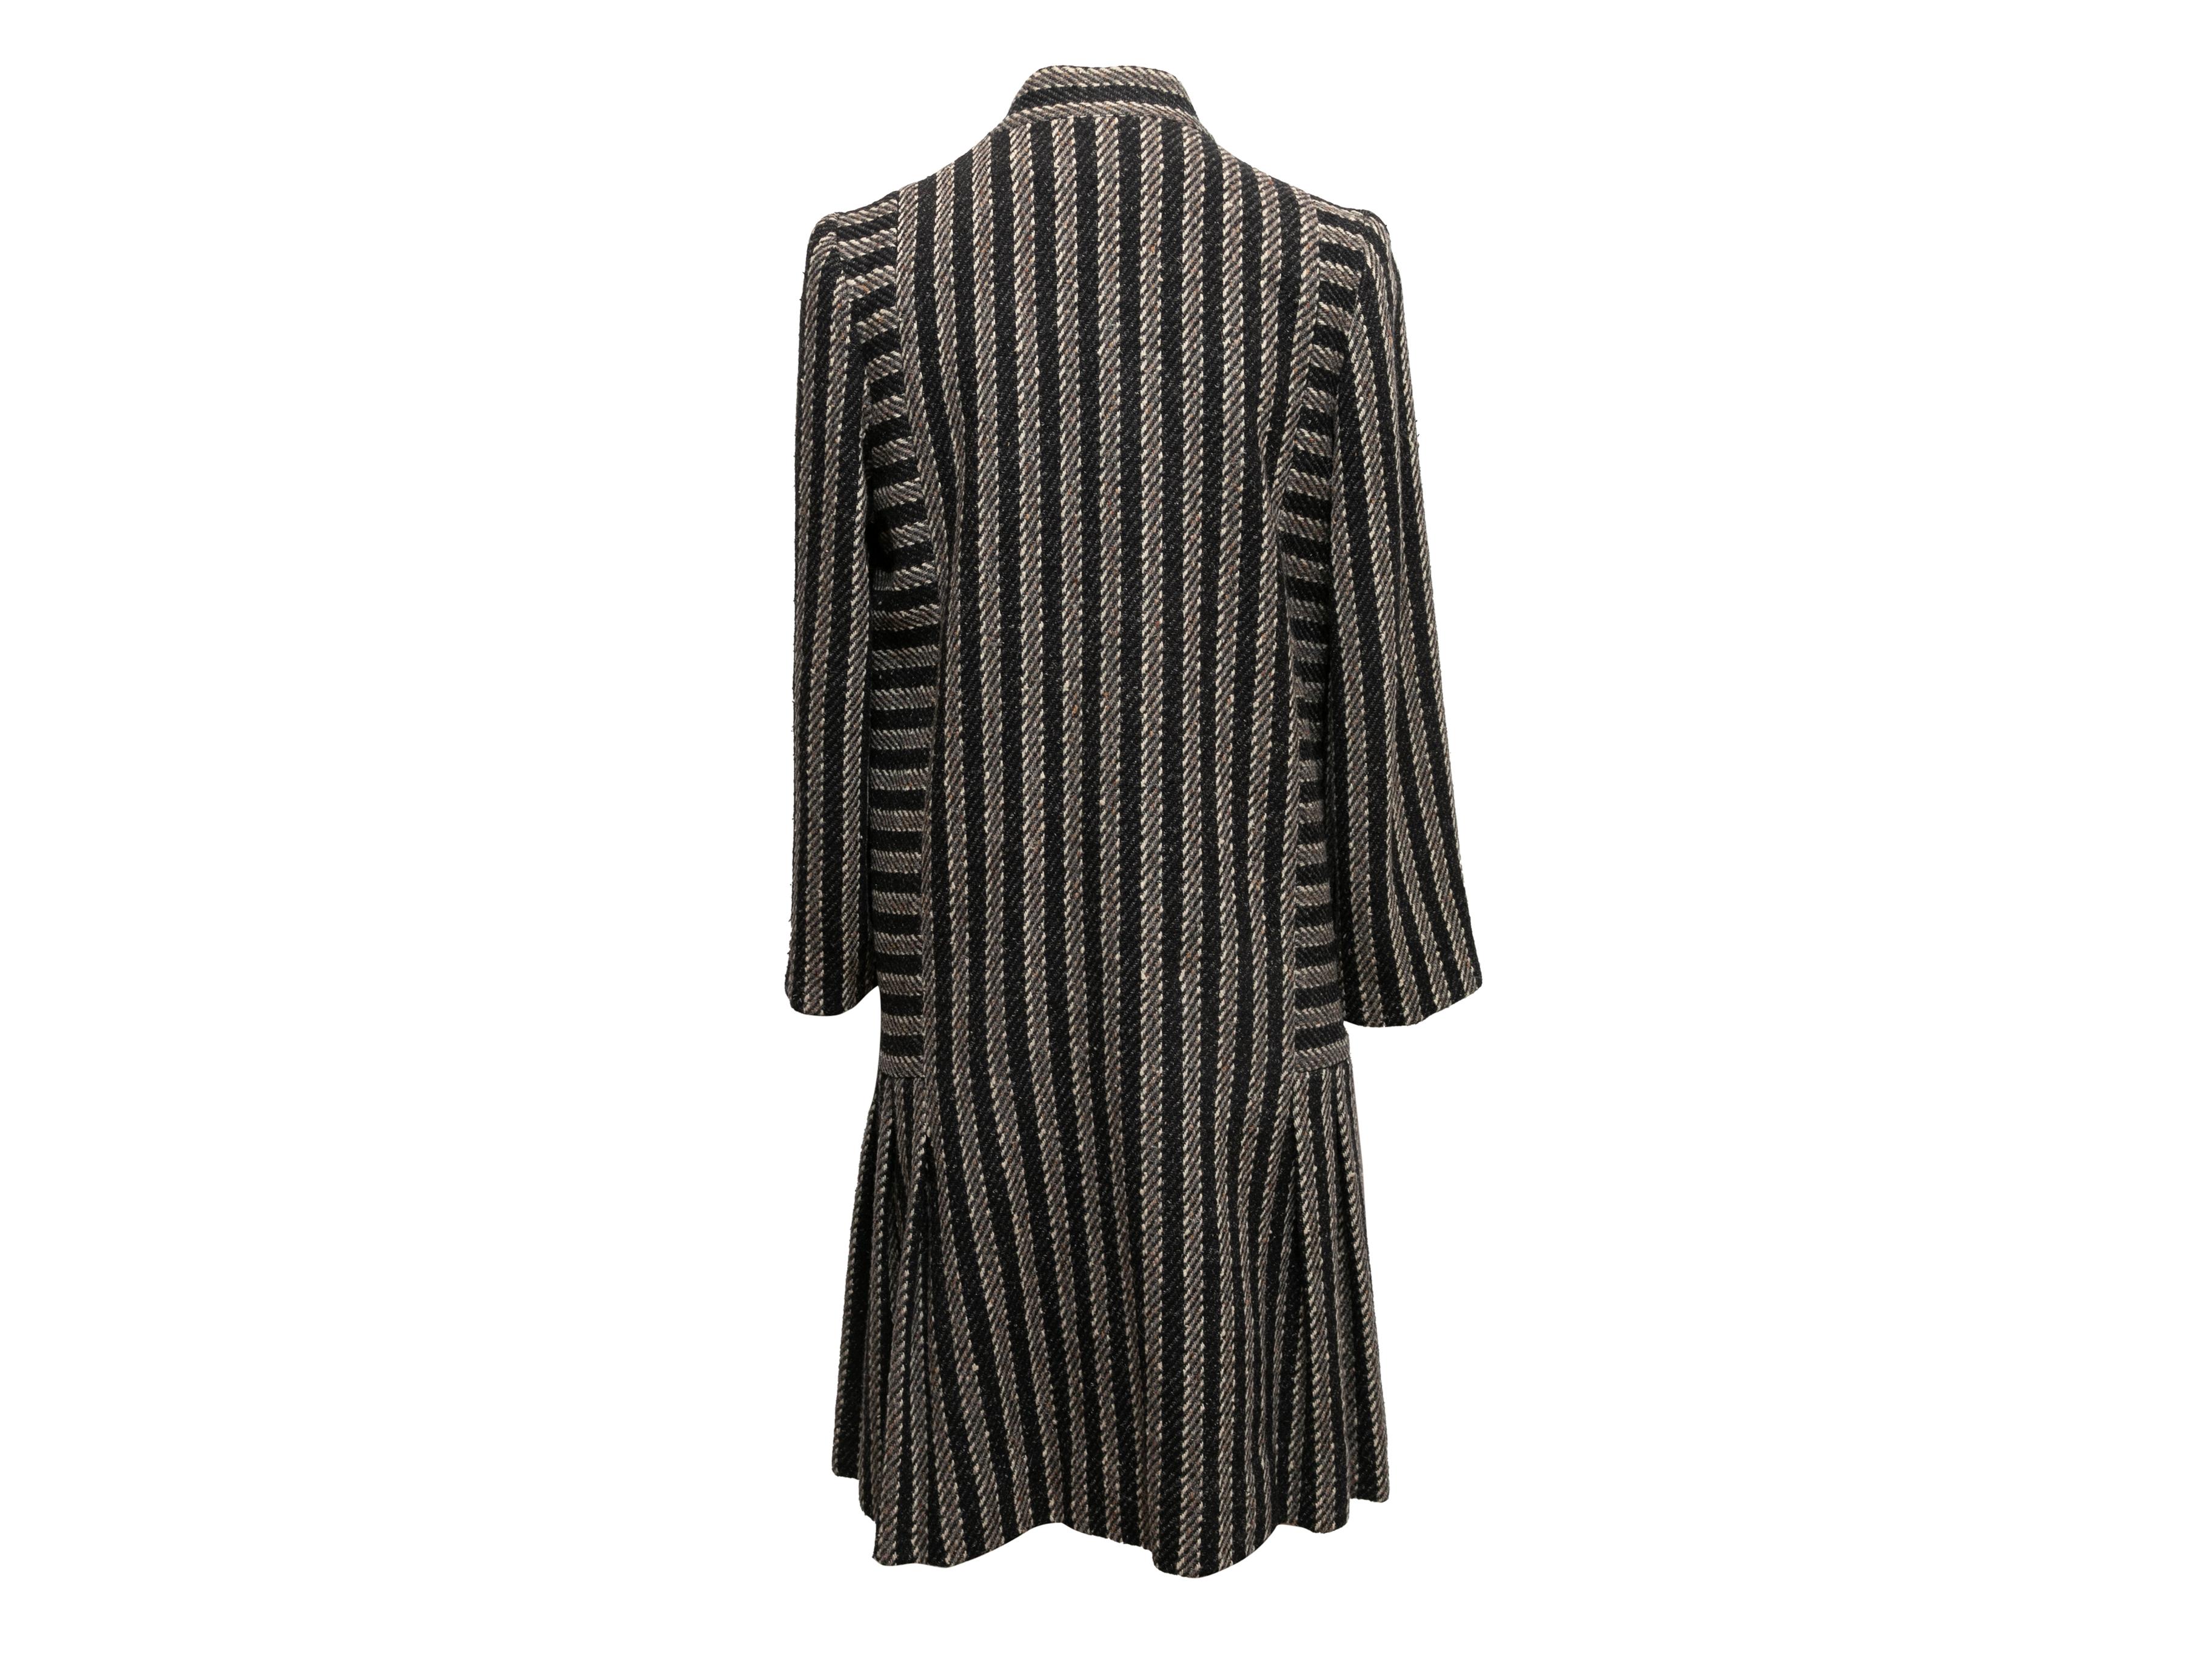 Vintage Black & White Pauline Trigere for Bergdorf Goodman Wool Coat Size O/S For Sale 2